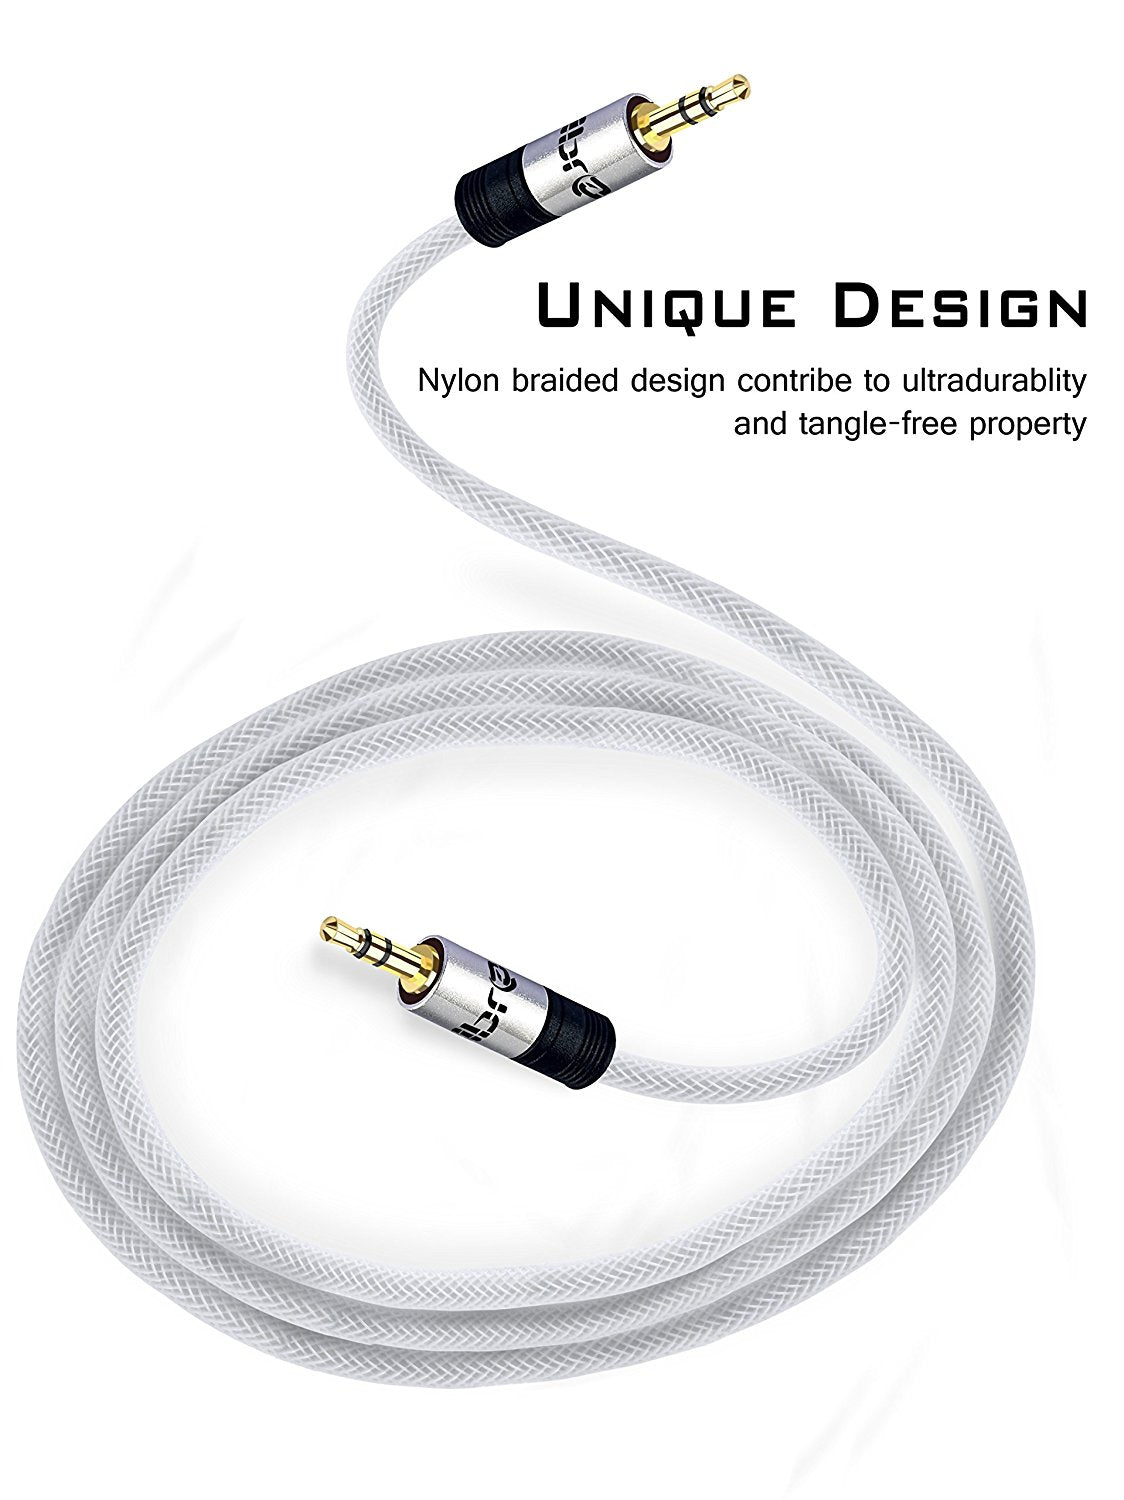 Aux Cable 5M 3.5mm Stereo Premium Auxiliary Audio Cable - for Beats Headphones Apple iPod iPhone iPad Samsung LG Smartphone MP3 Player Home / Car etc - IBRA Silver